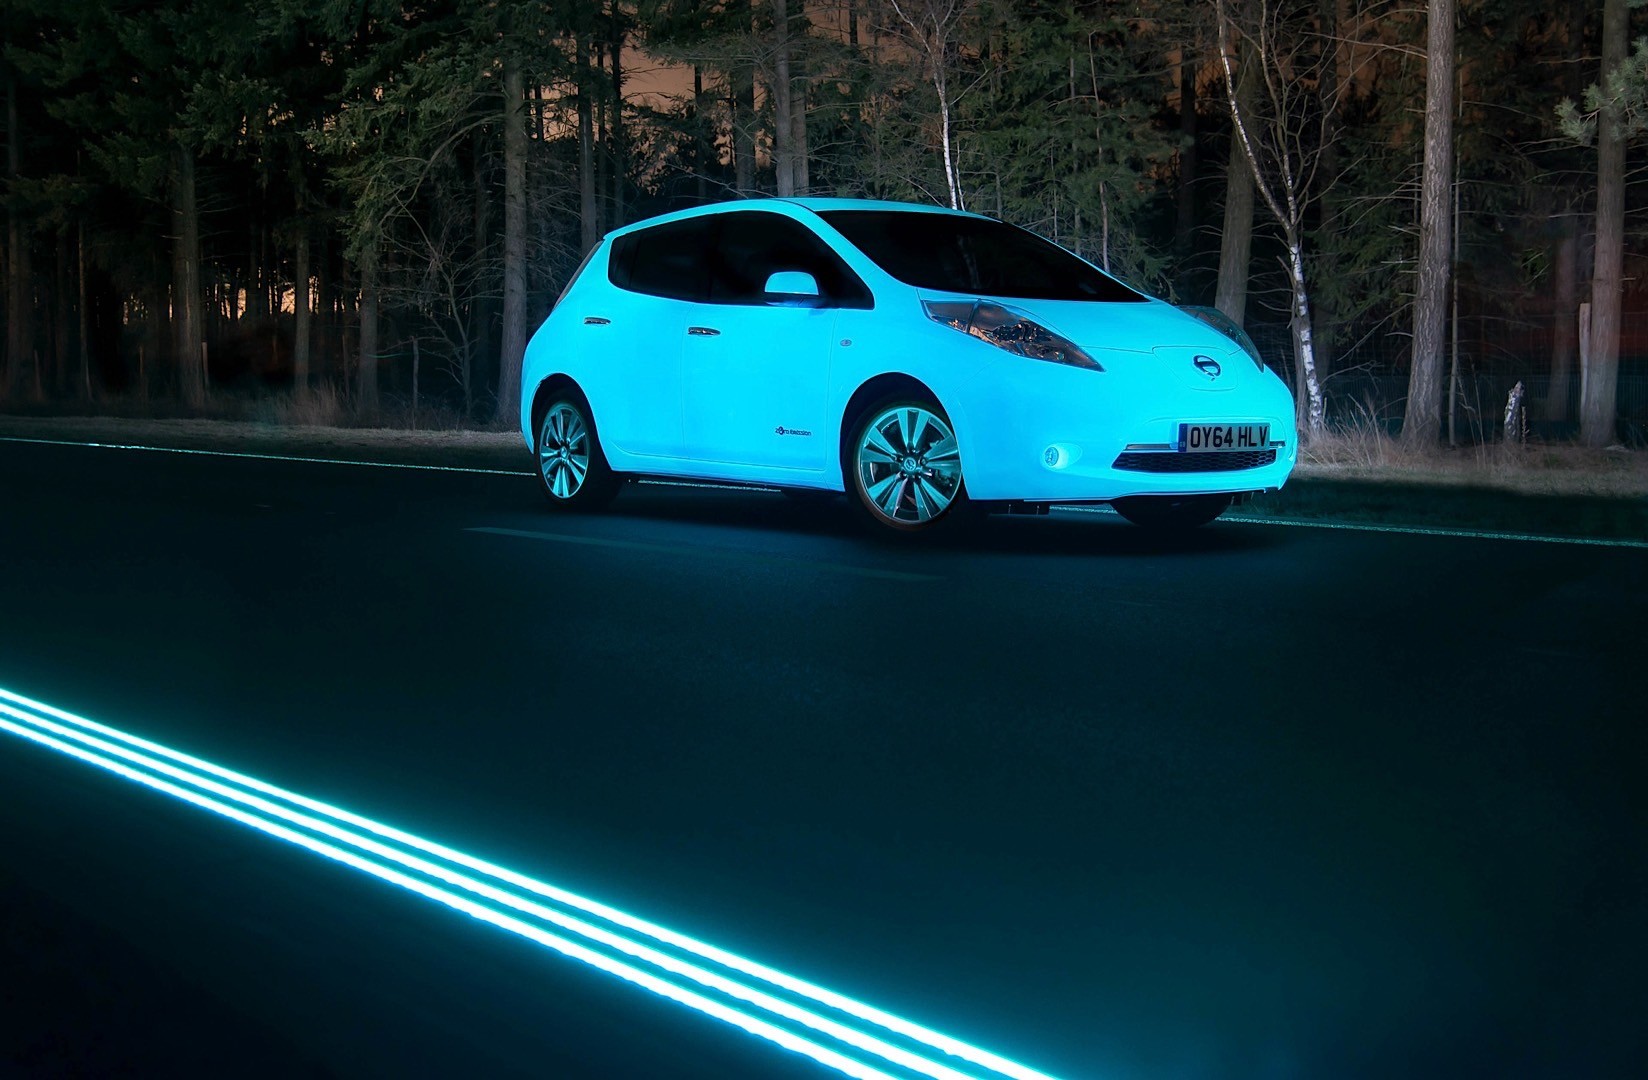 Phosphorescent Nissan Leaf on Glowing Highway Looks Like a Scene From